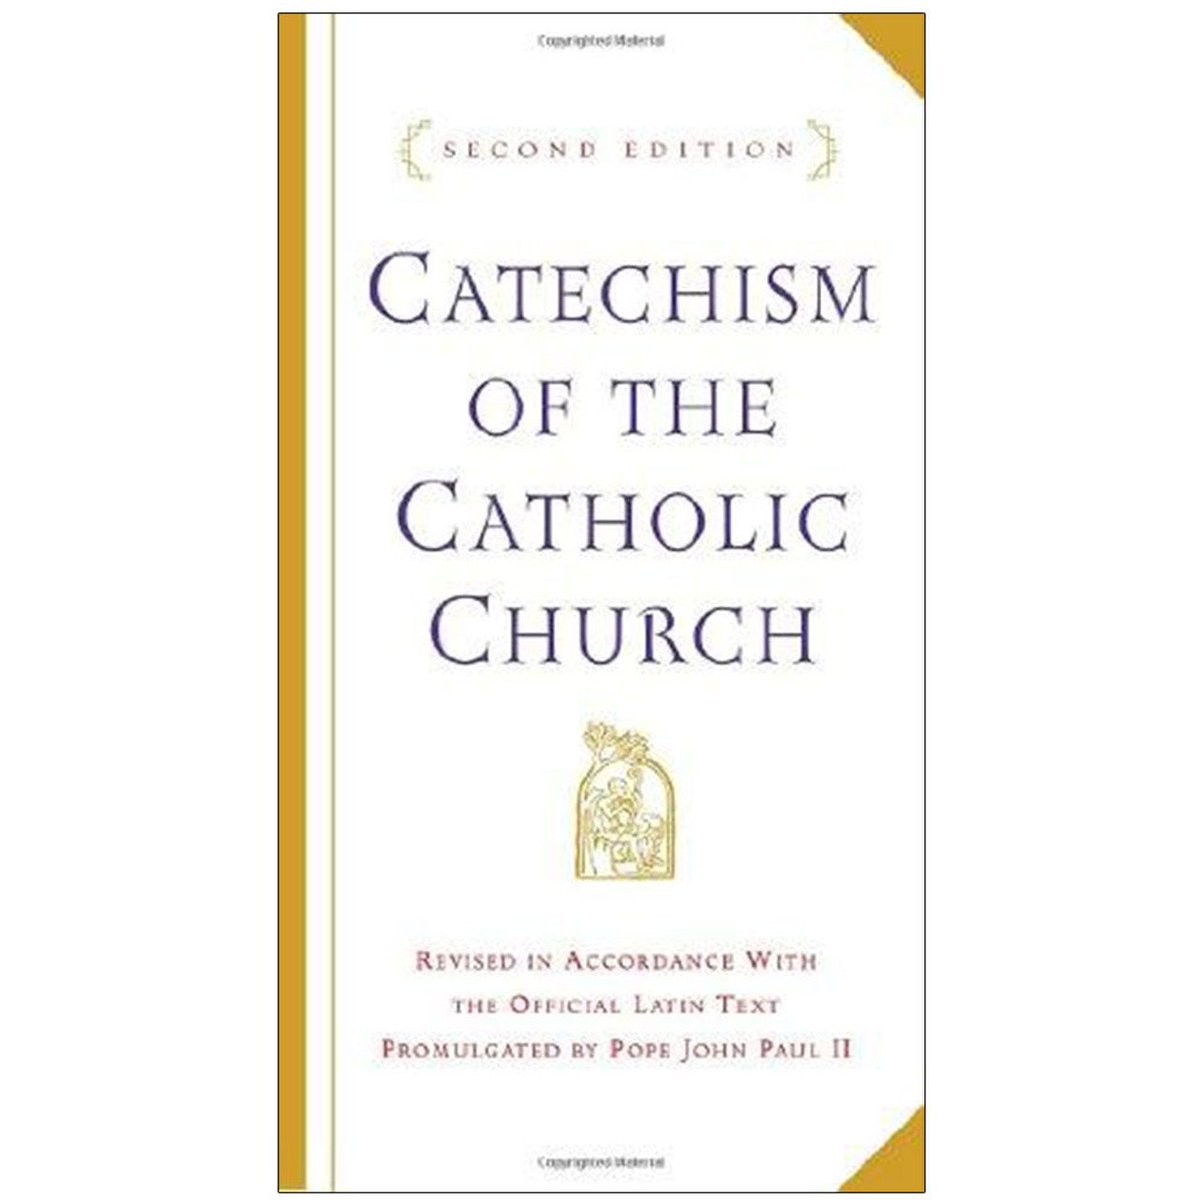 The Catechism was published in 1992 under Pope (now Saint) John Paul II. The committee tasked with compiling Catholic teaching on faith & morals was established 20 years after the closing of Vatican II (& led by Joseph Ratzinger) - but here's the little known bit: a…